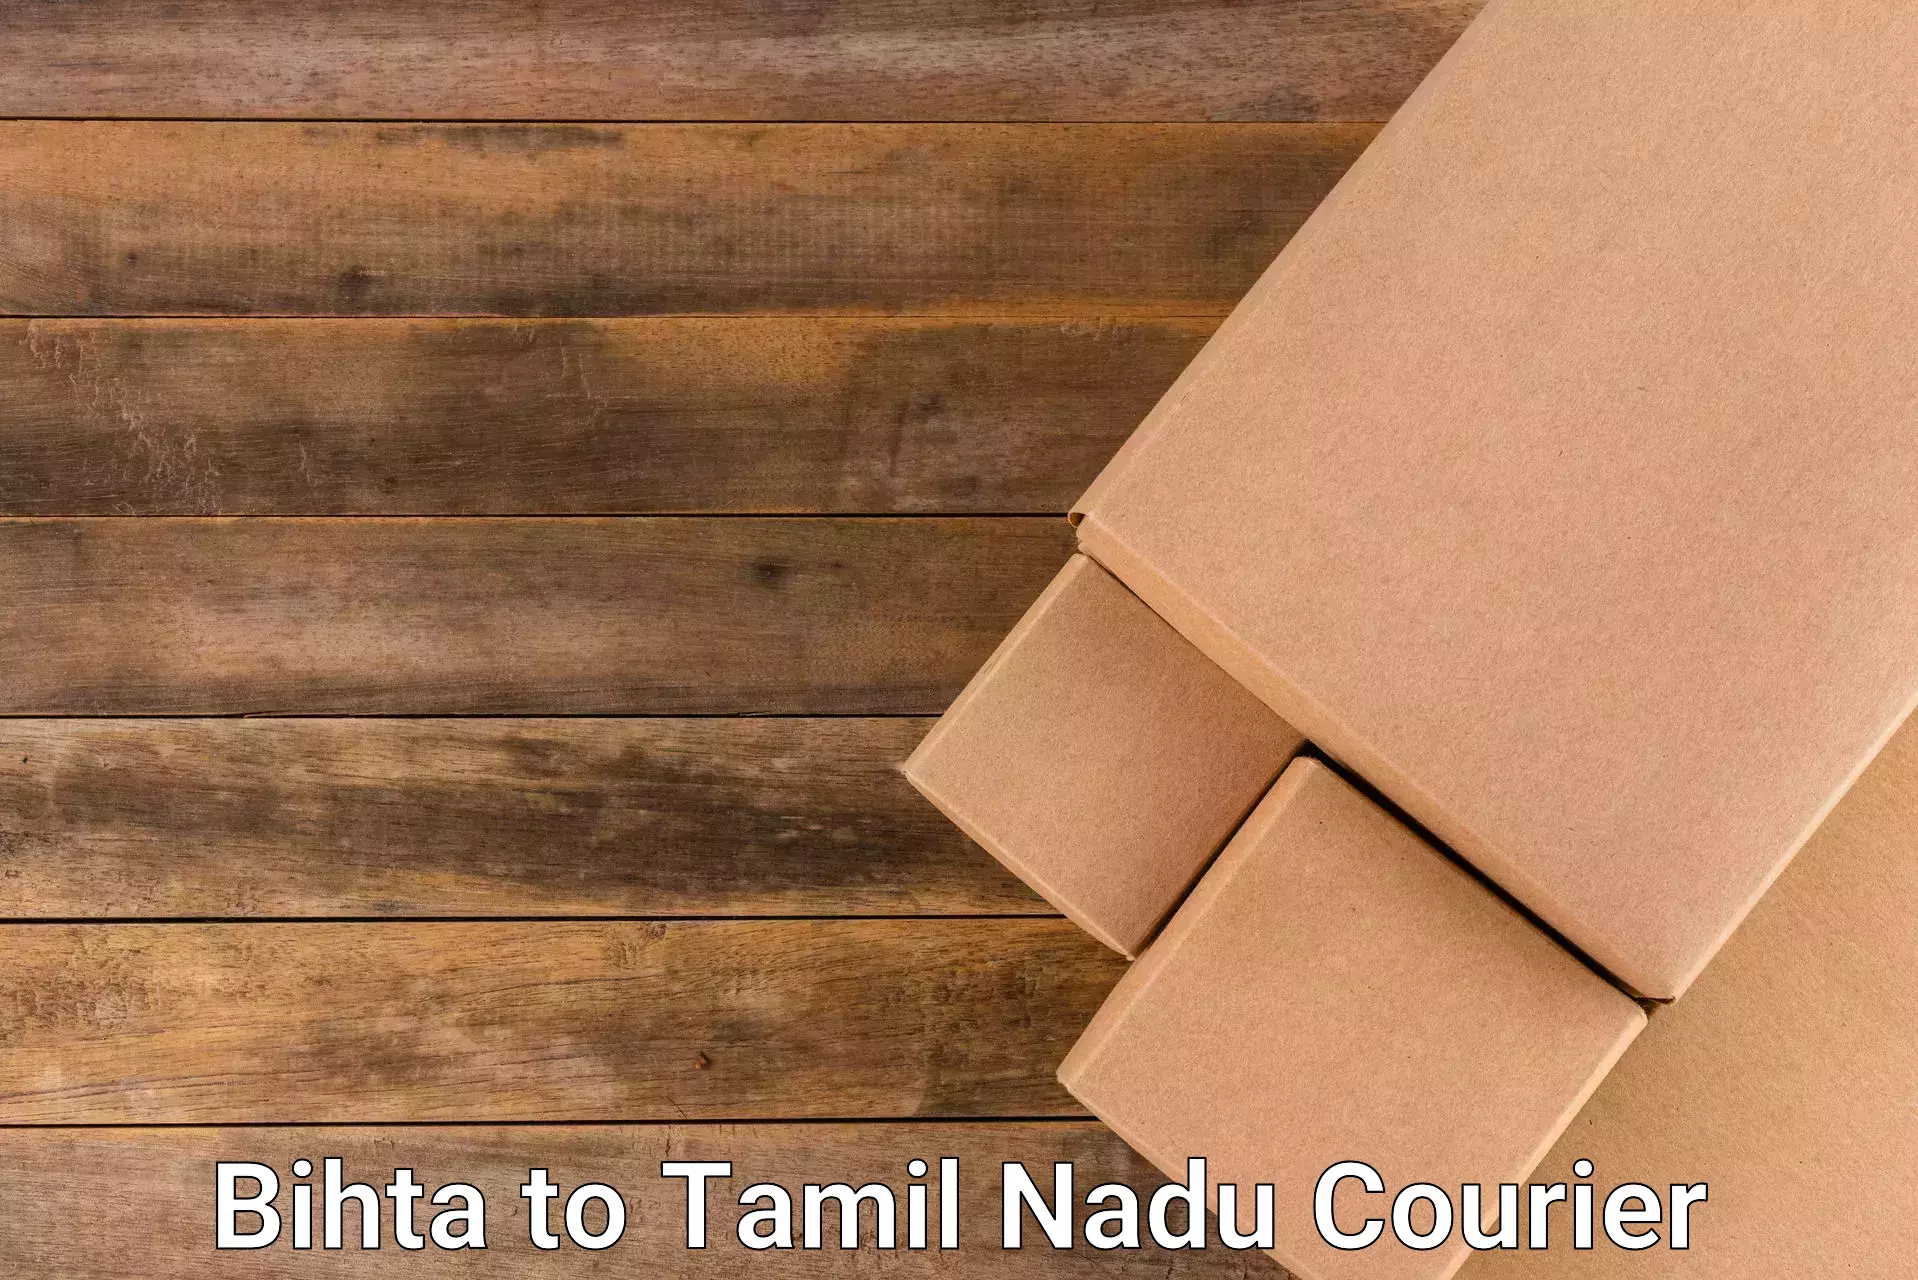 Business delivery service in Bihta to Tamil Nadu